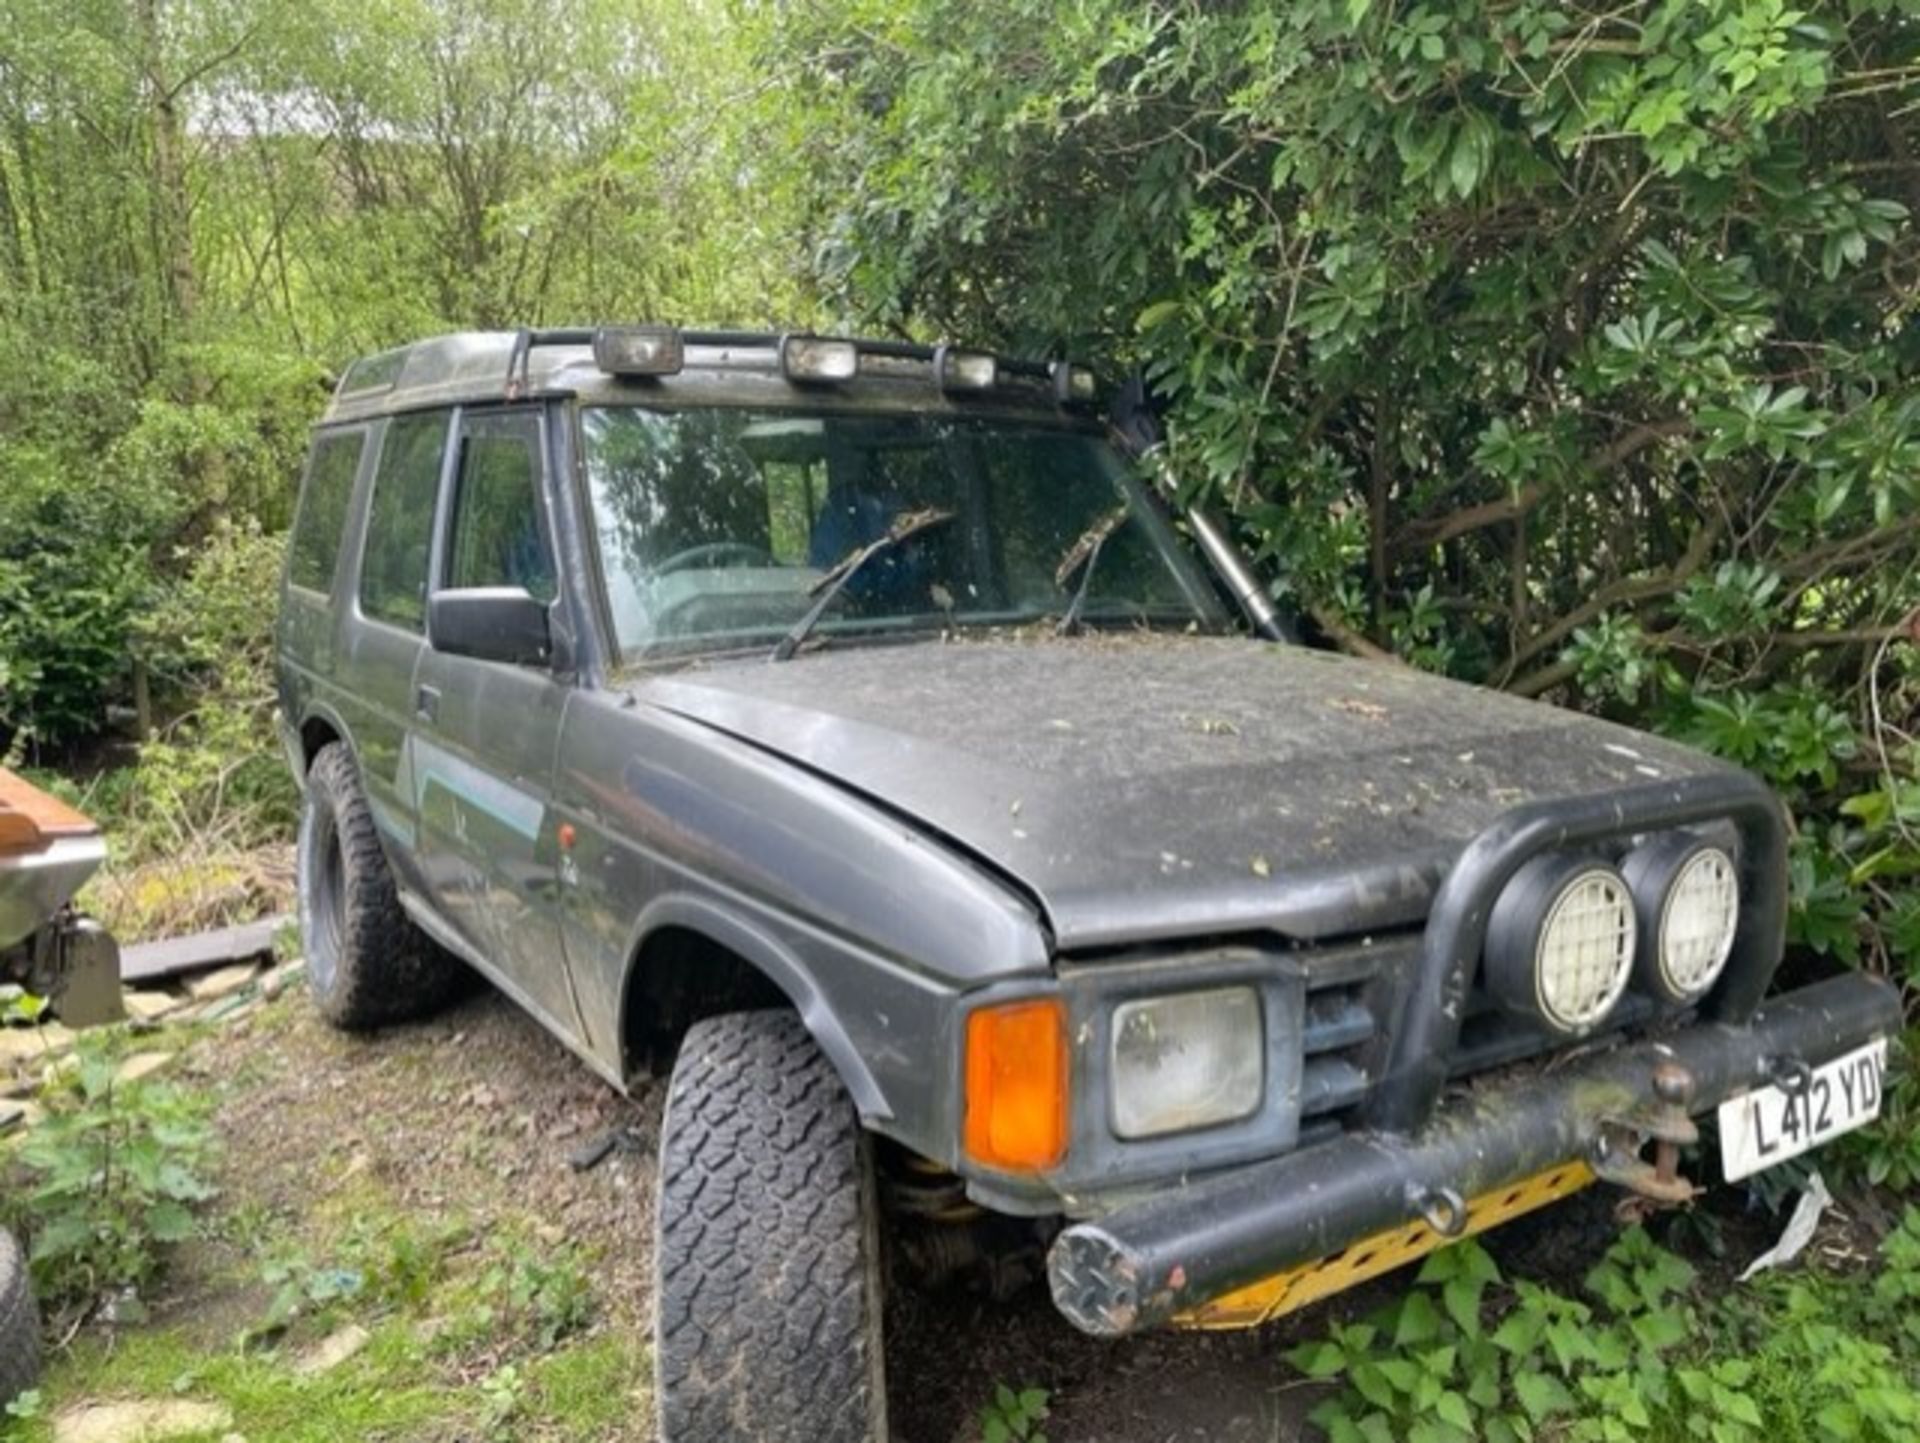 Off road machine Land Rover discovery, original series 1 bodywork, 2 doors , 1 high suspension - Image 5 of 9